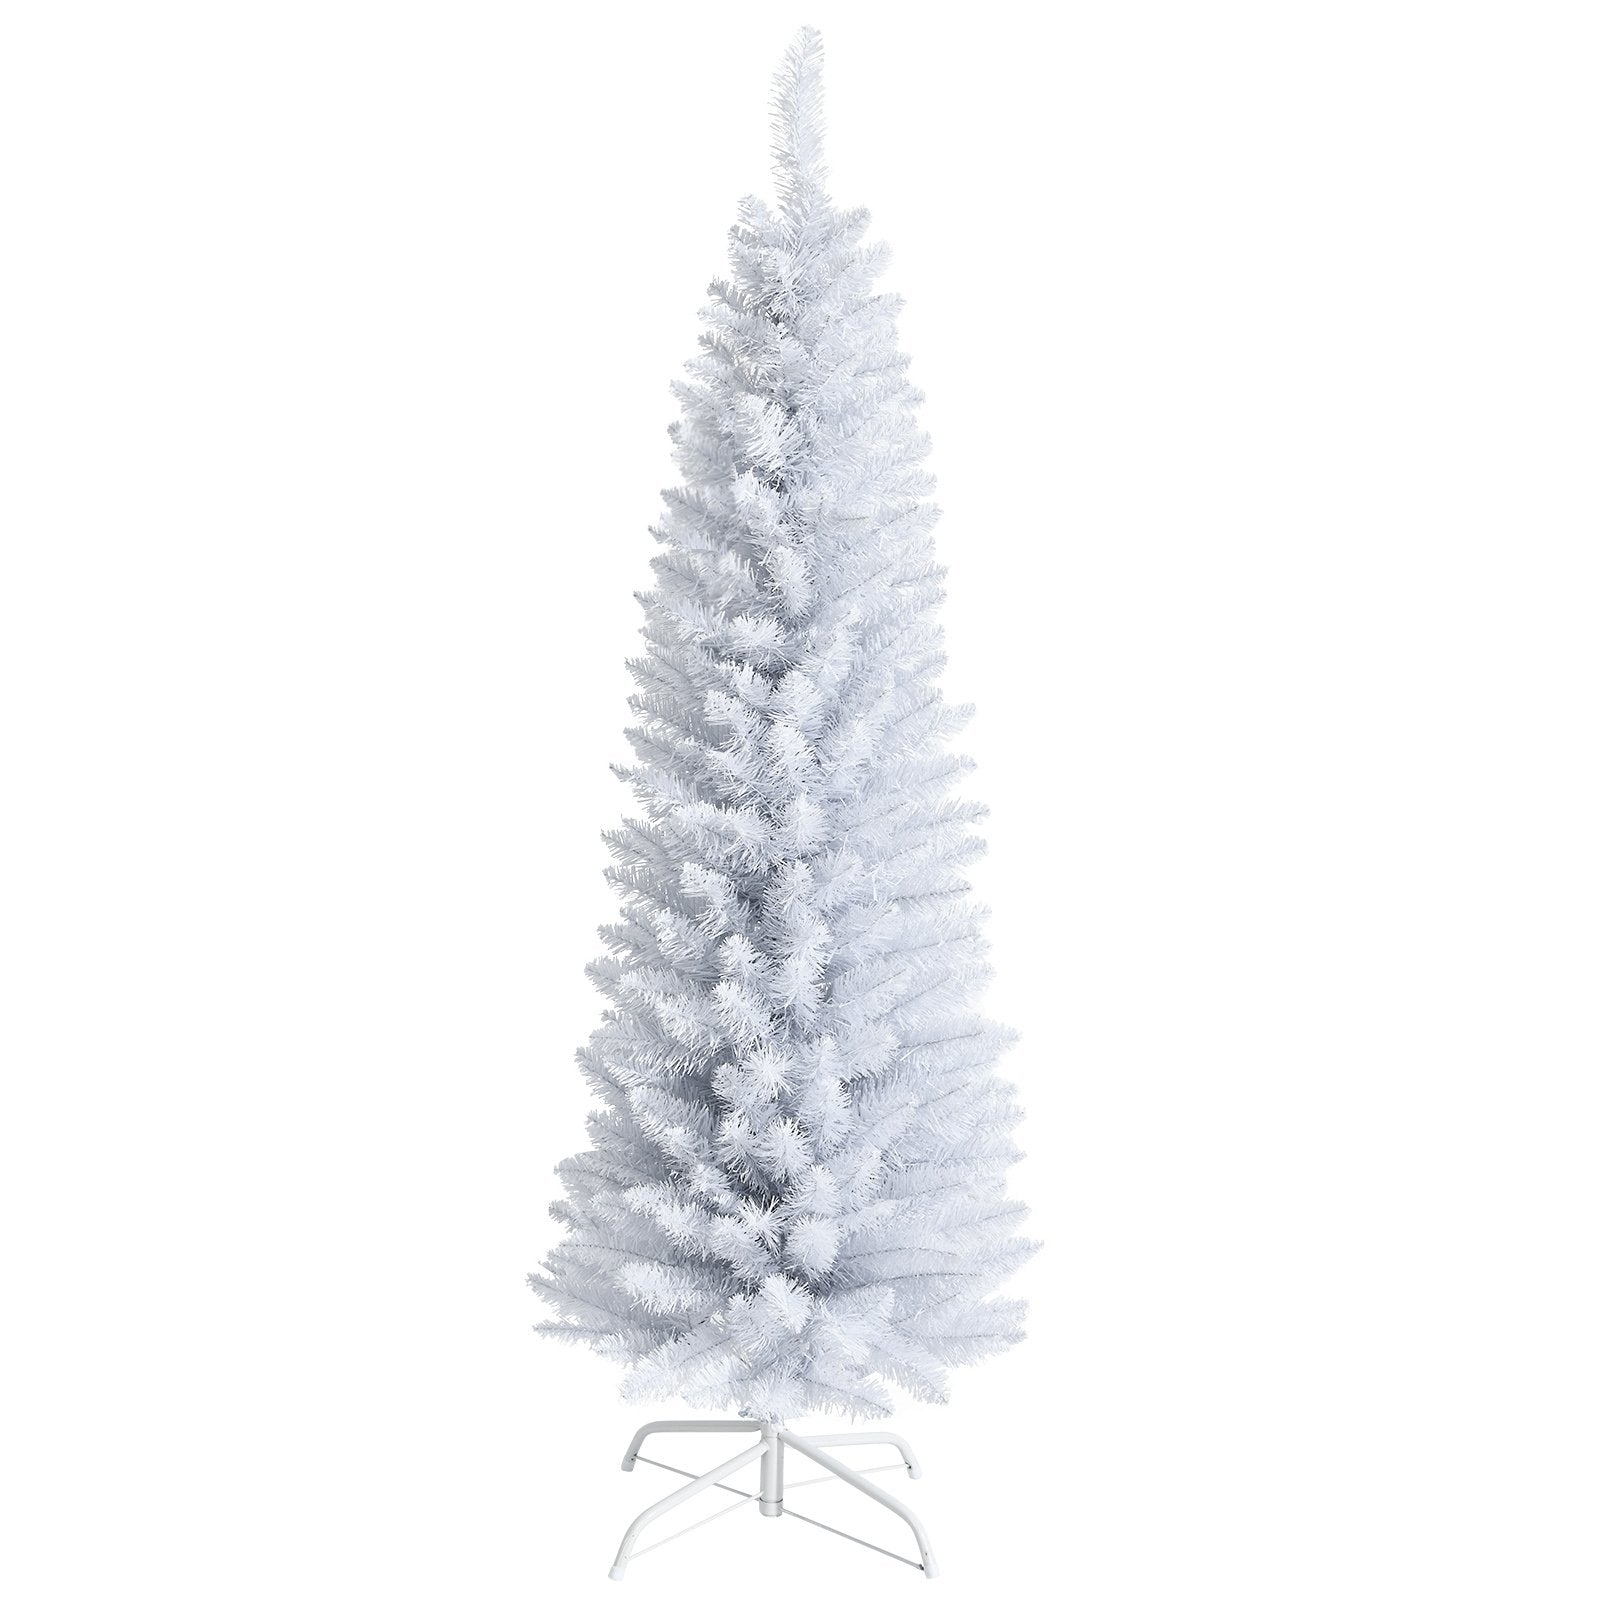 Slim Artificial Christmas Pencil Tree with PVC Needles and Folding Metal Stand-5', White at Gallery Canada